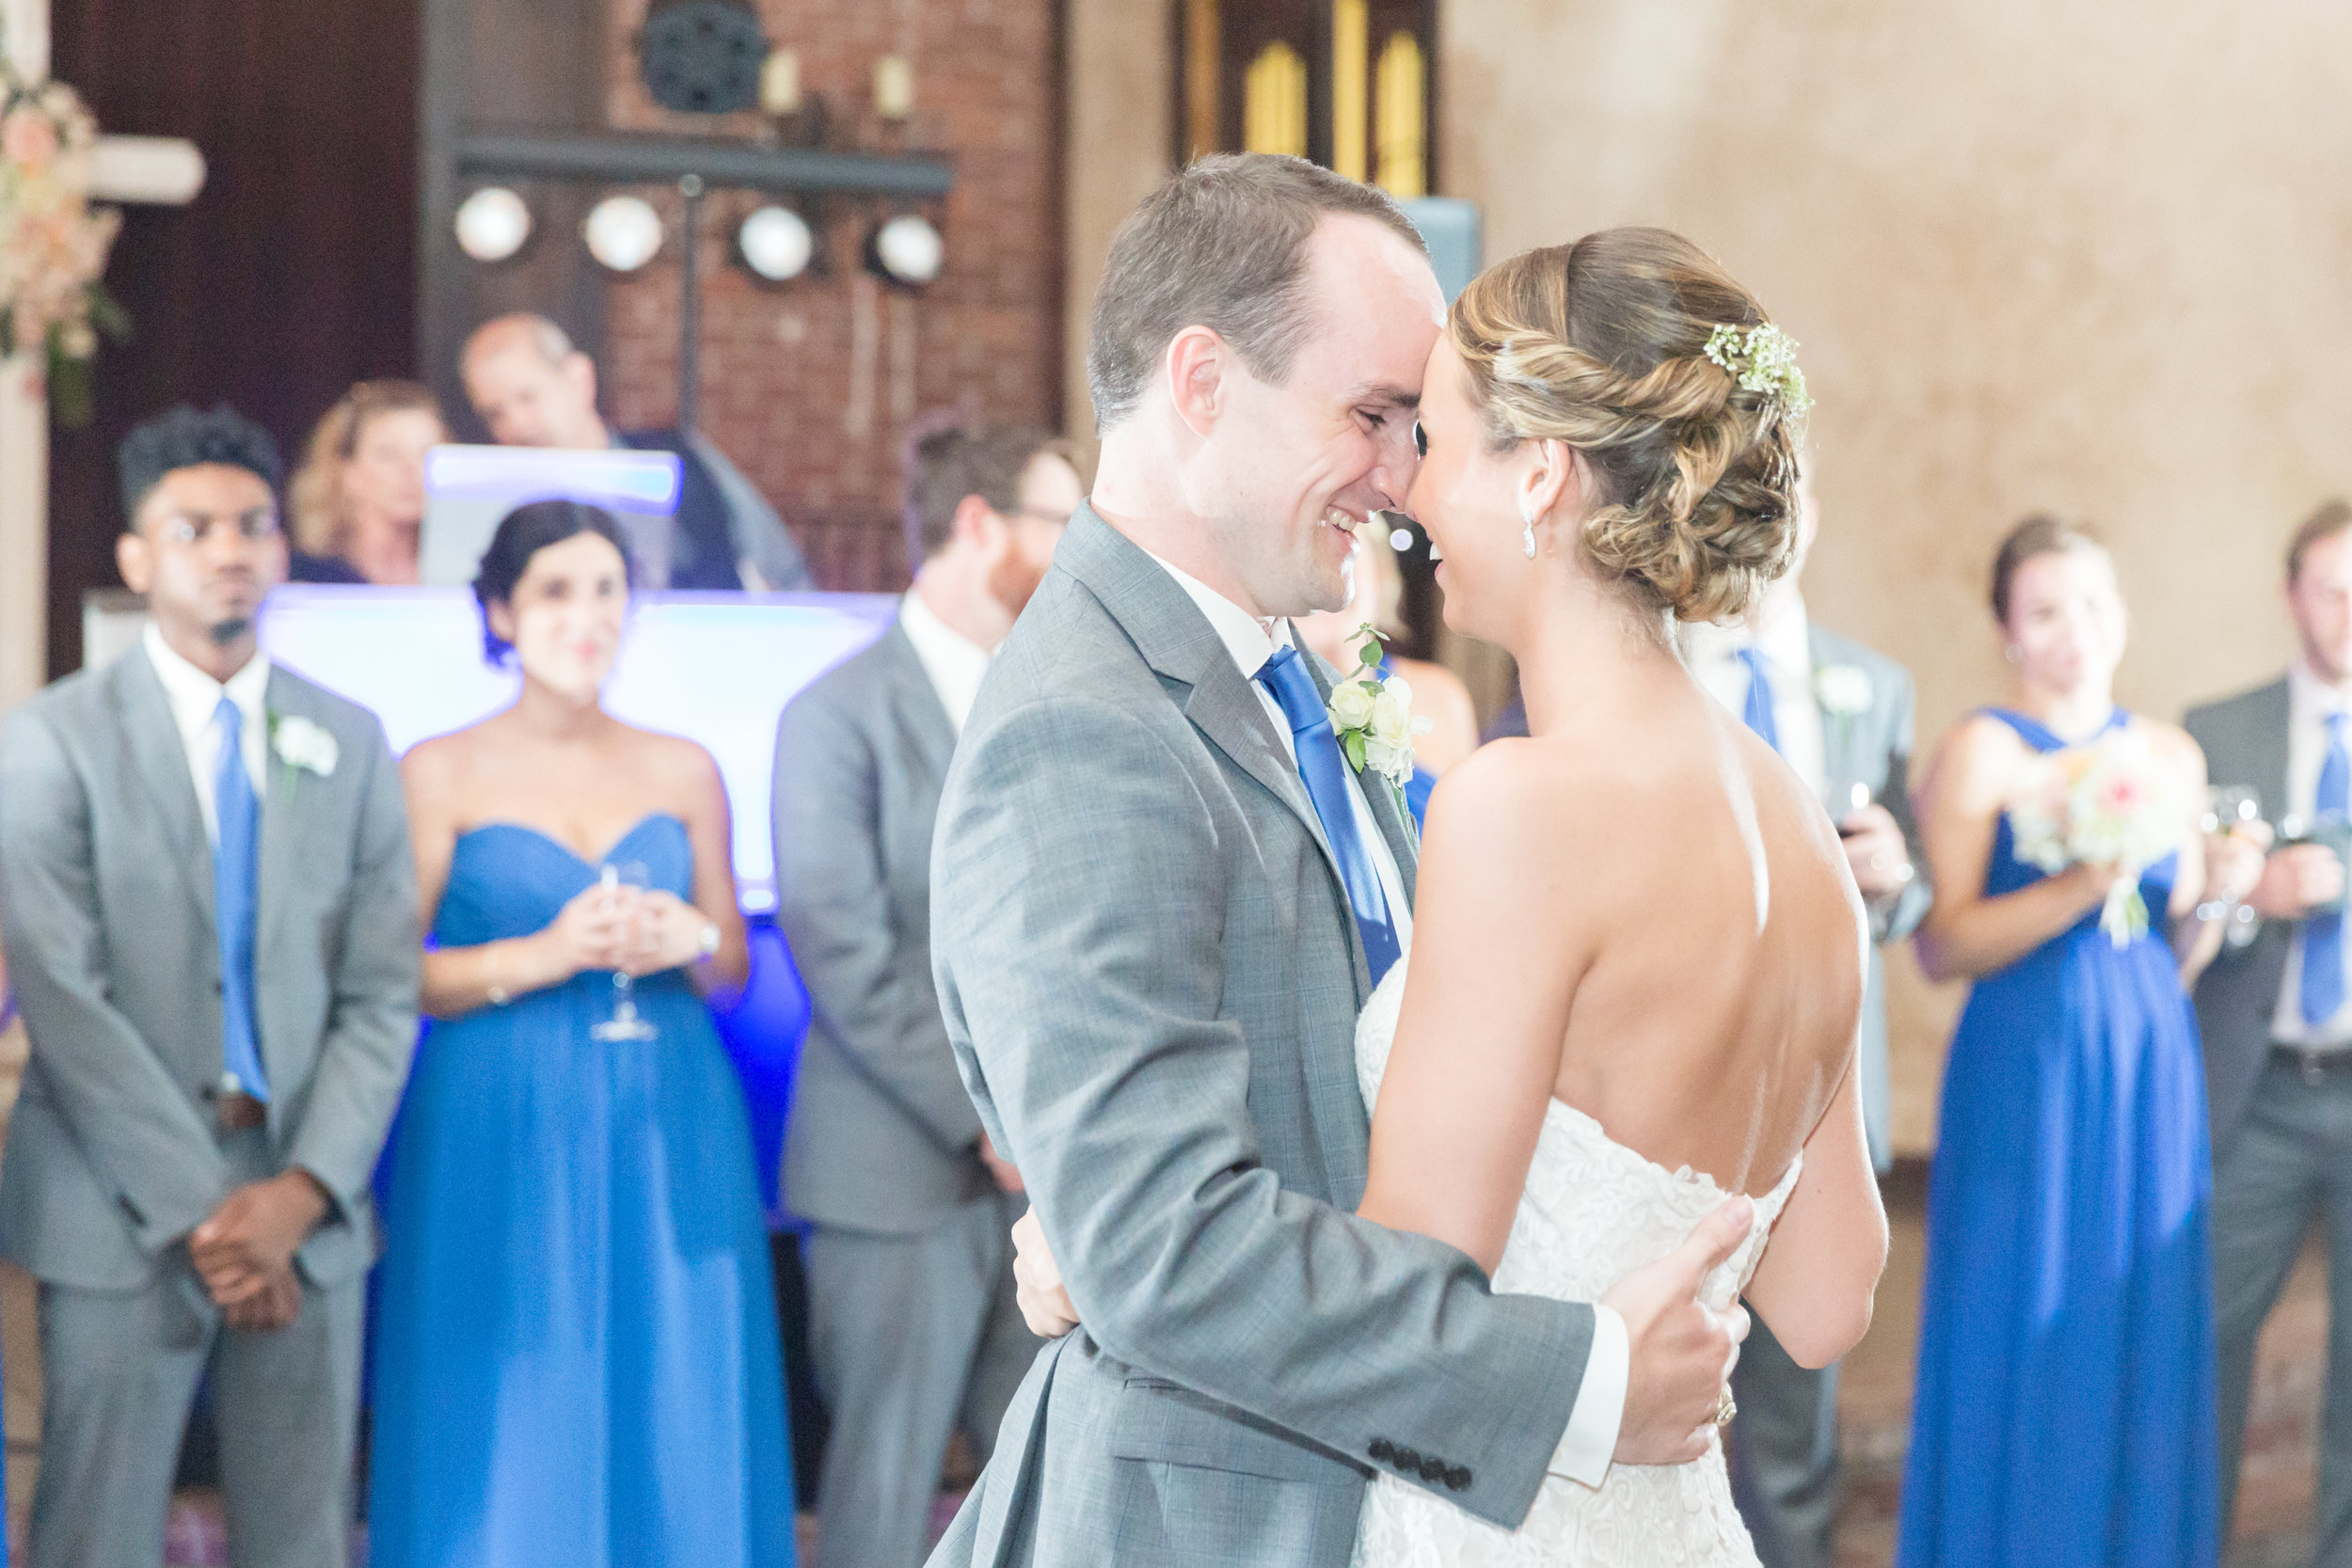  Lauren and Matt shared their first dance to "Perfect" by Ed Sheeran. It has become quite popular this year! 